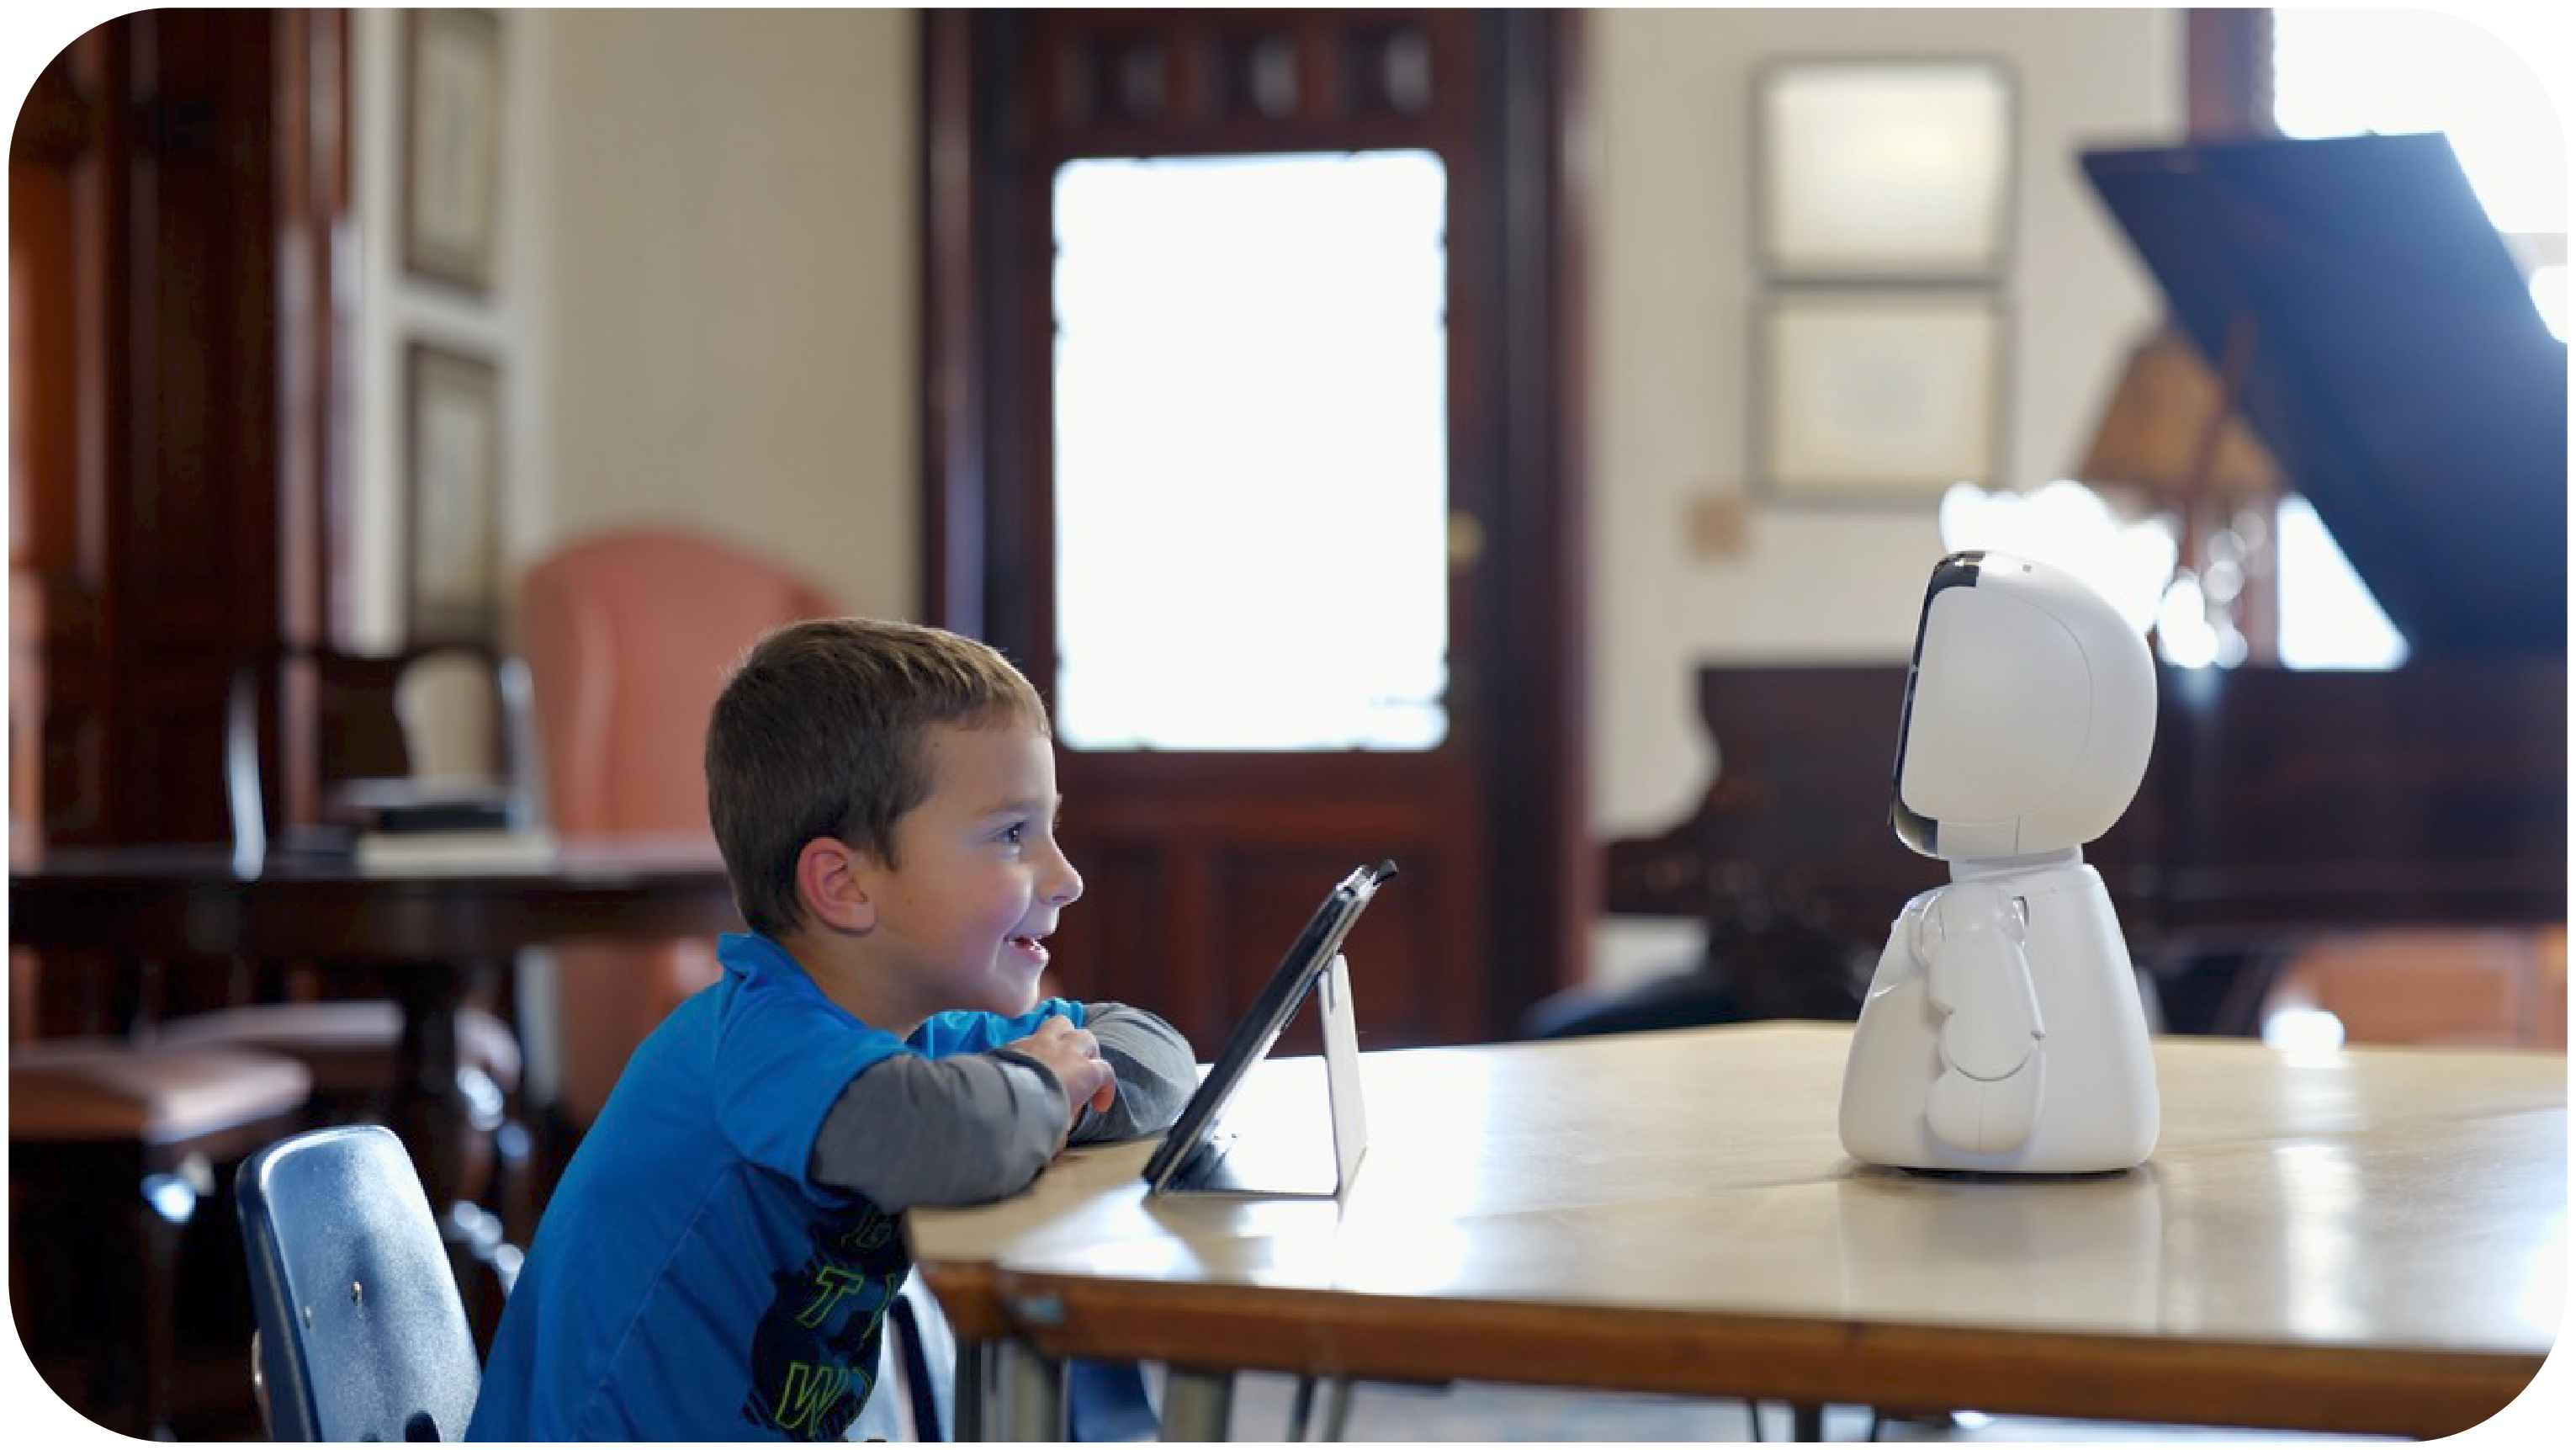 INTERACTIVE ROBOTS FOR KIDS